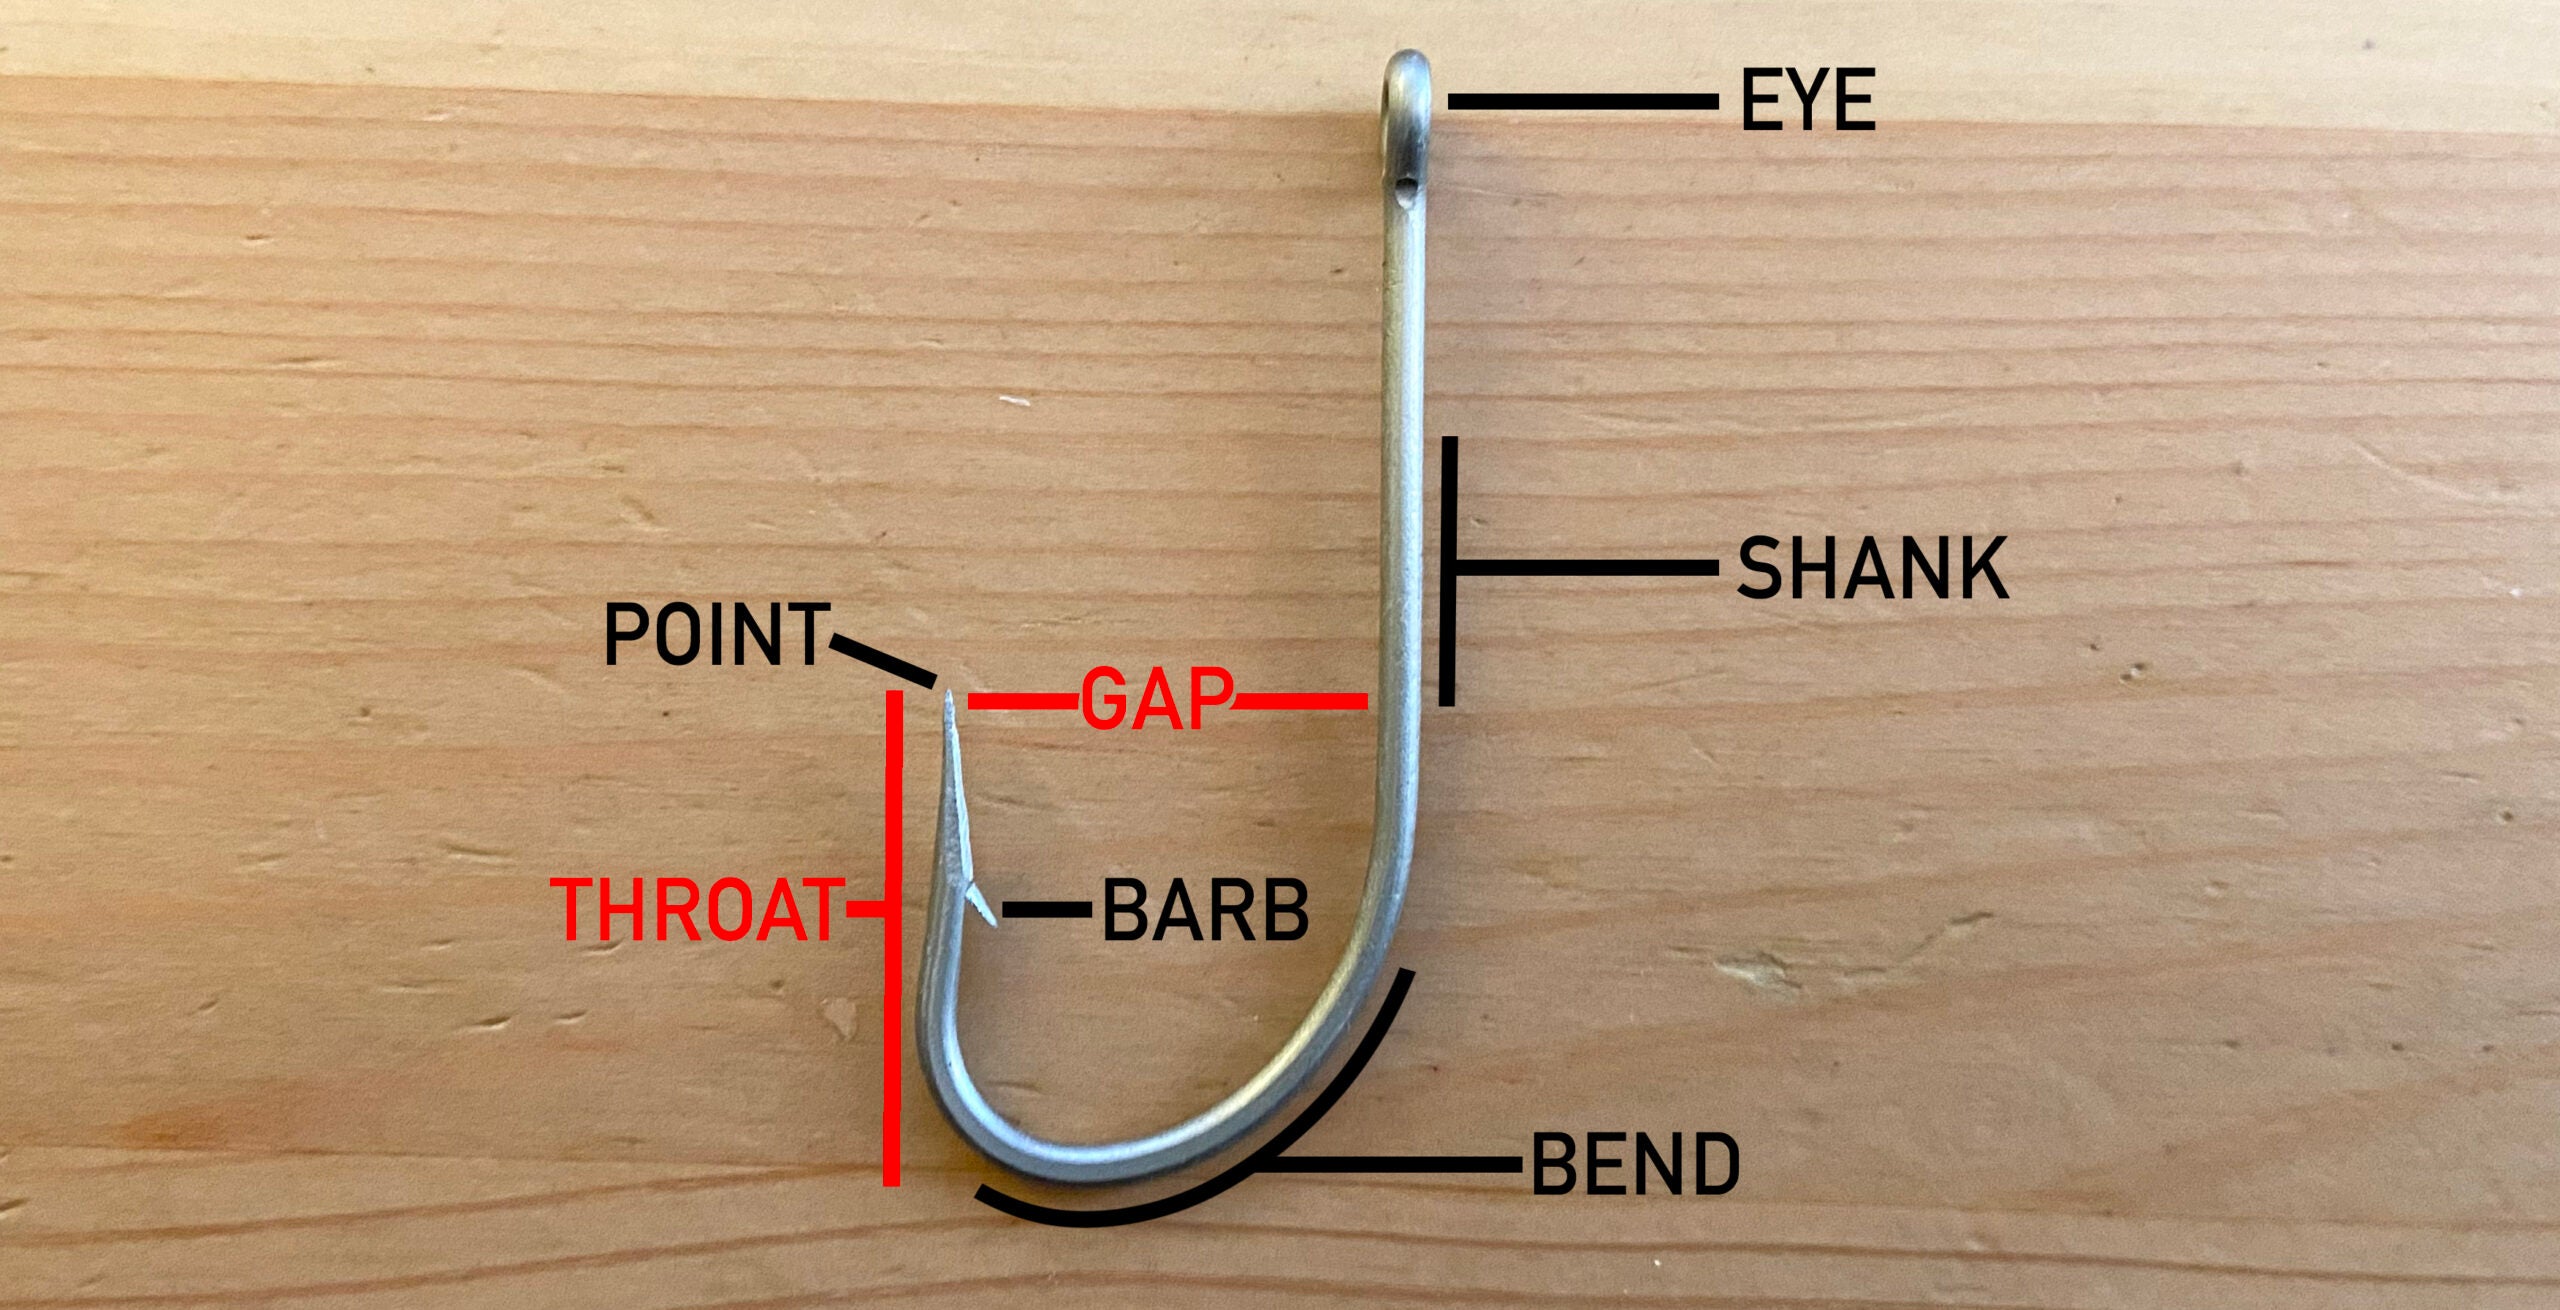 How to Measure Hook Size